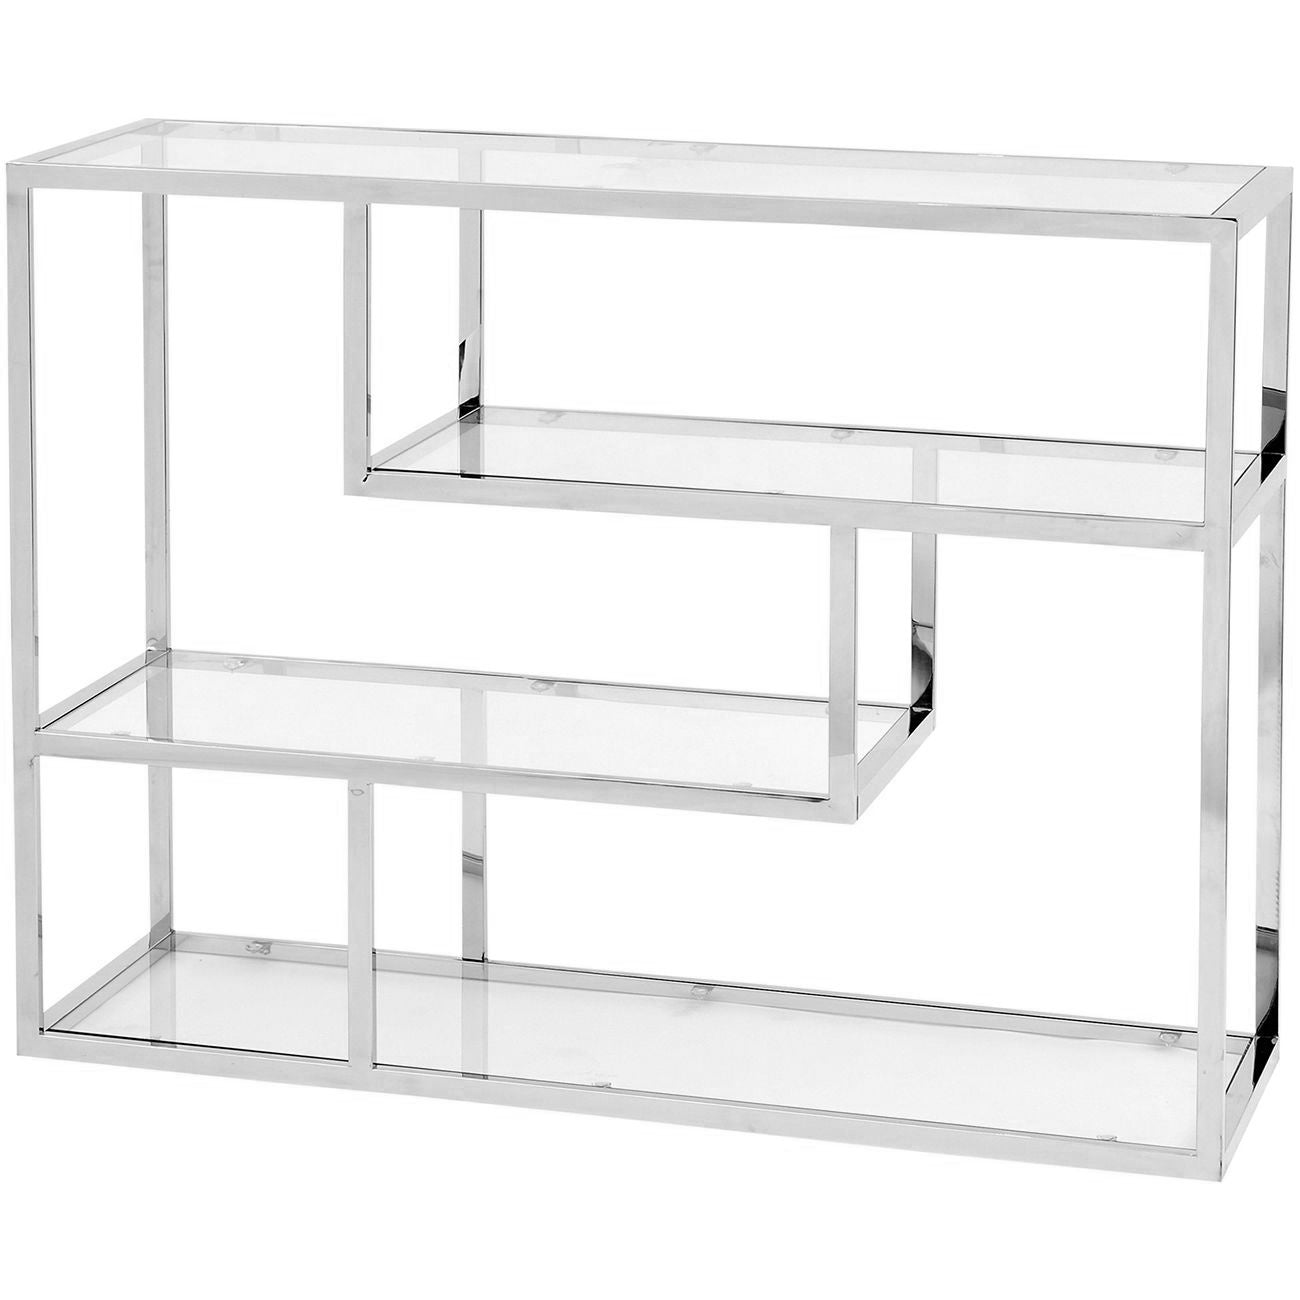 Argento Stainless Steel And Glass Small Shelving Unit - Pavilion Interiors